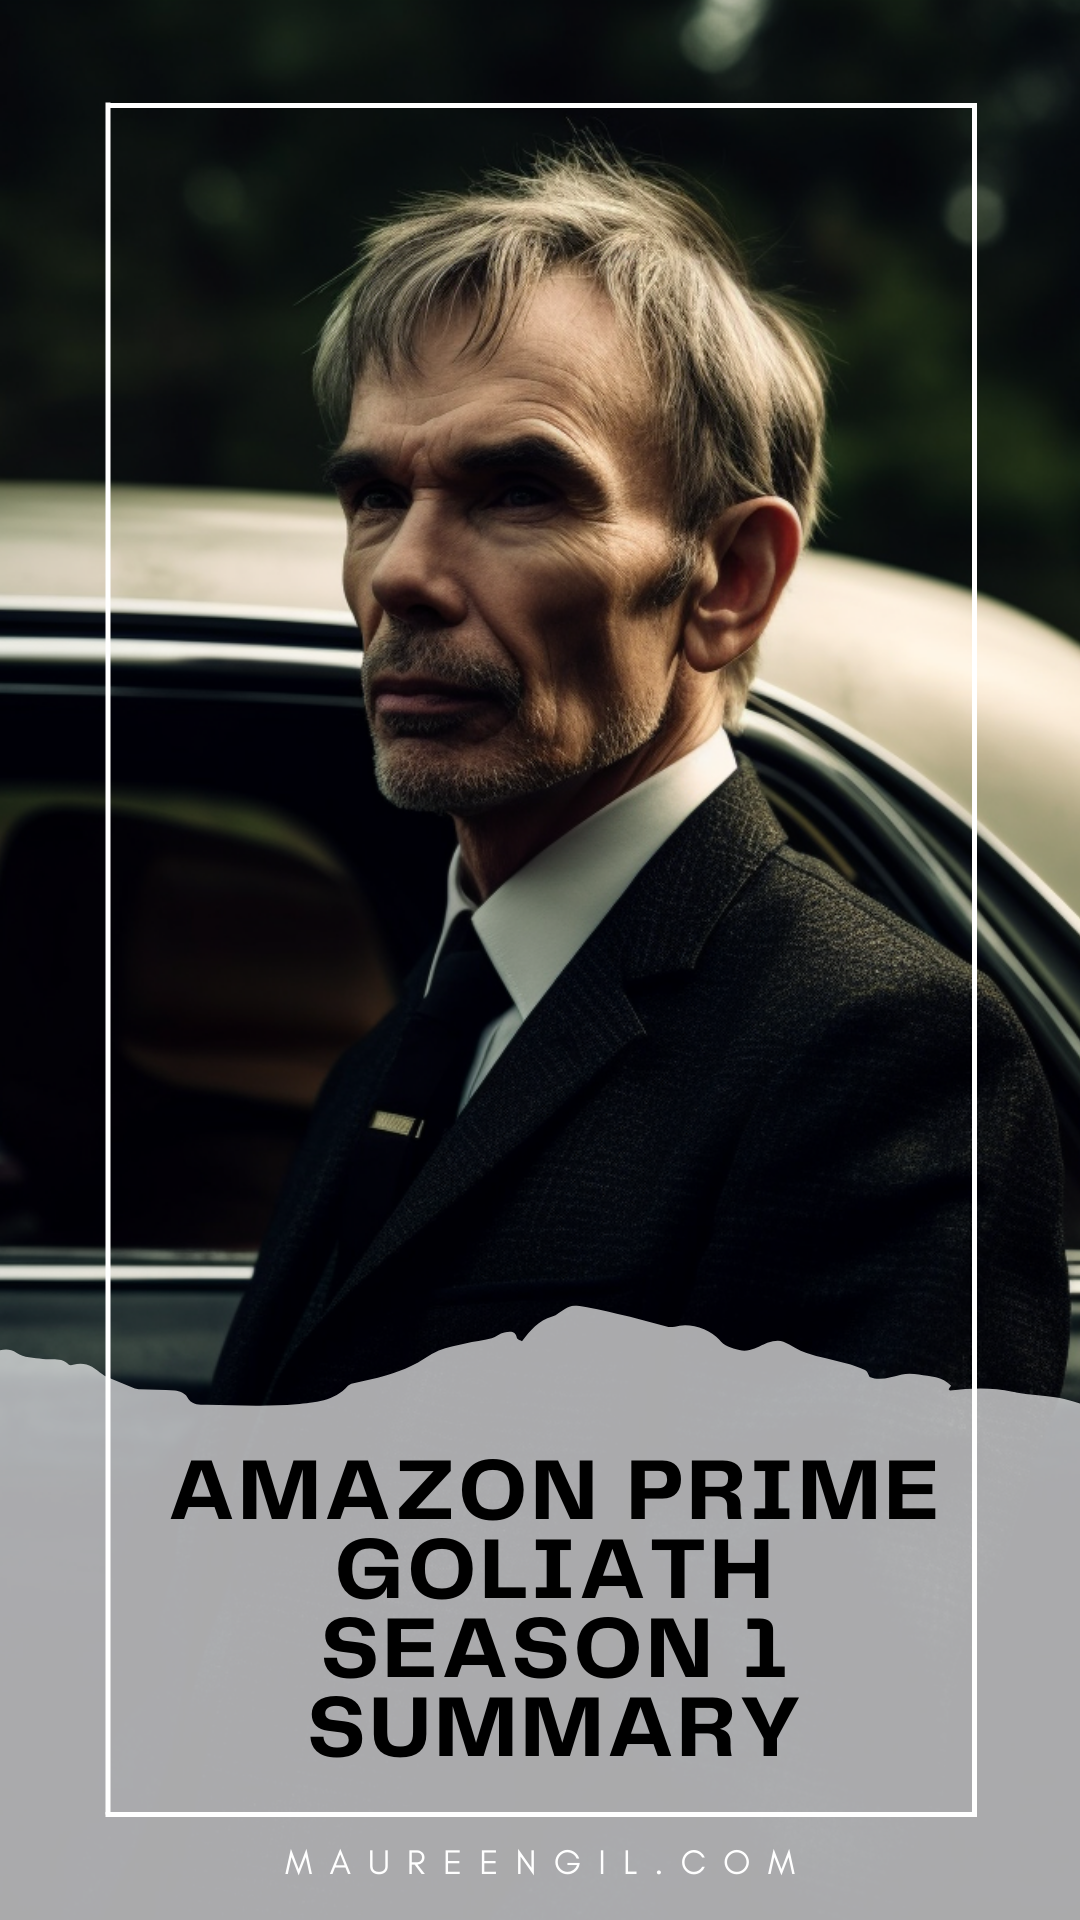 Get ready for a thrilling ride with Amazon Prime's Goliath Season 1! This summary will give you a taste of the show's awesomeness.